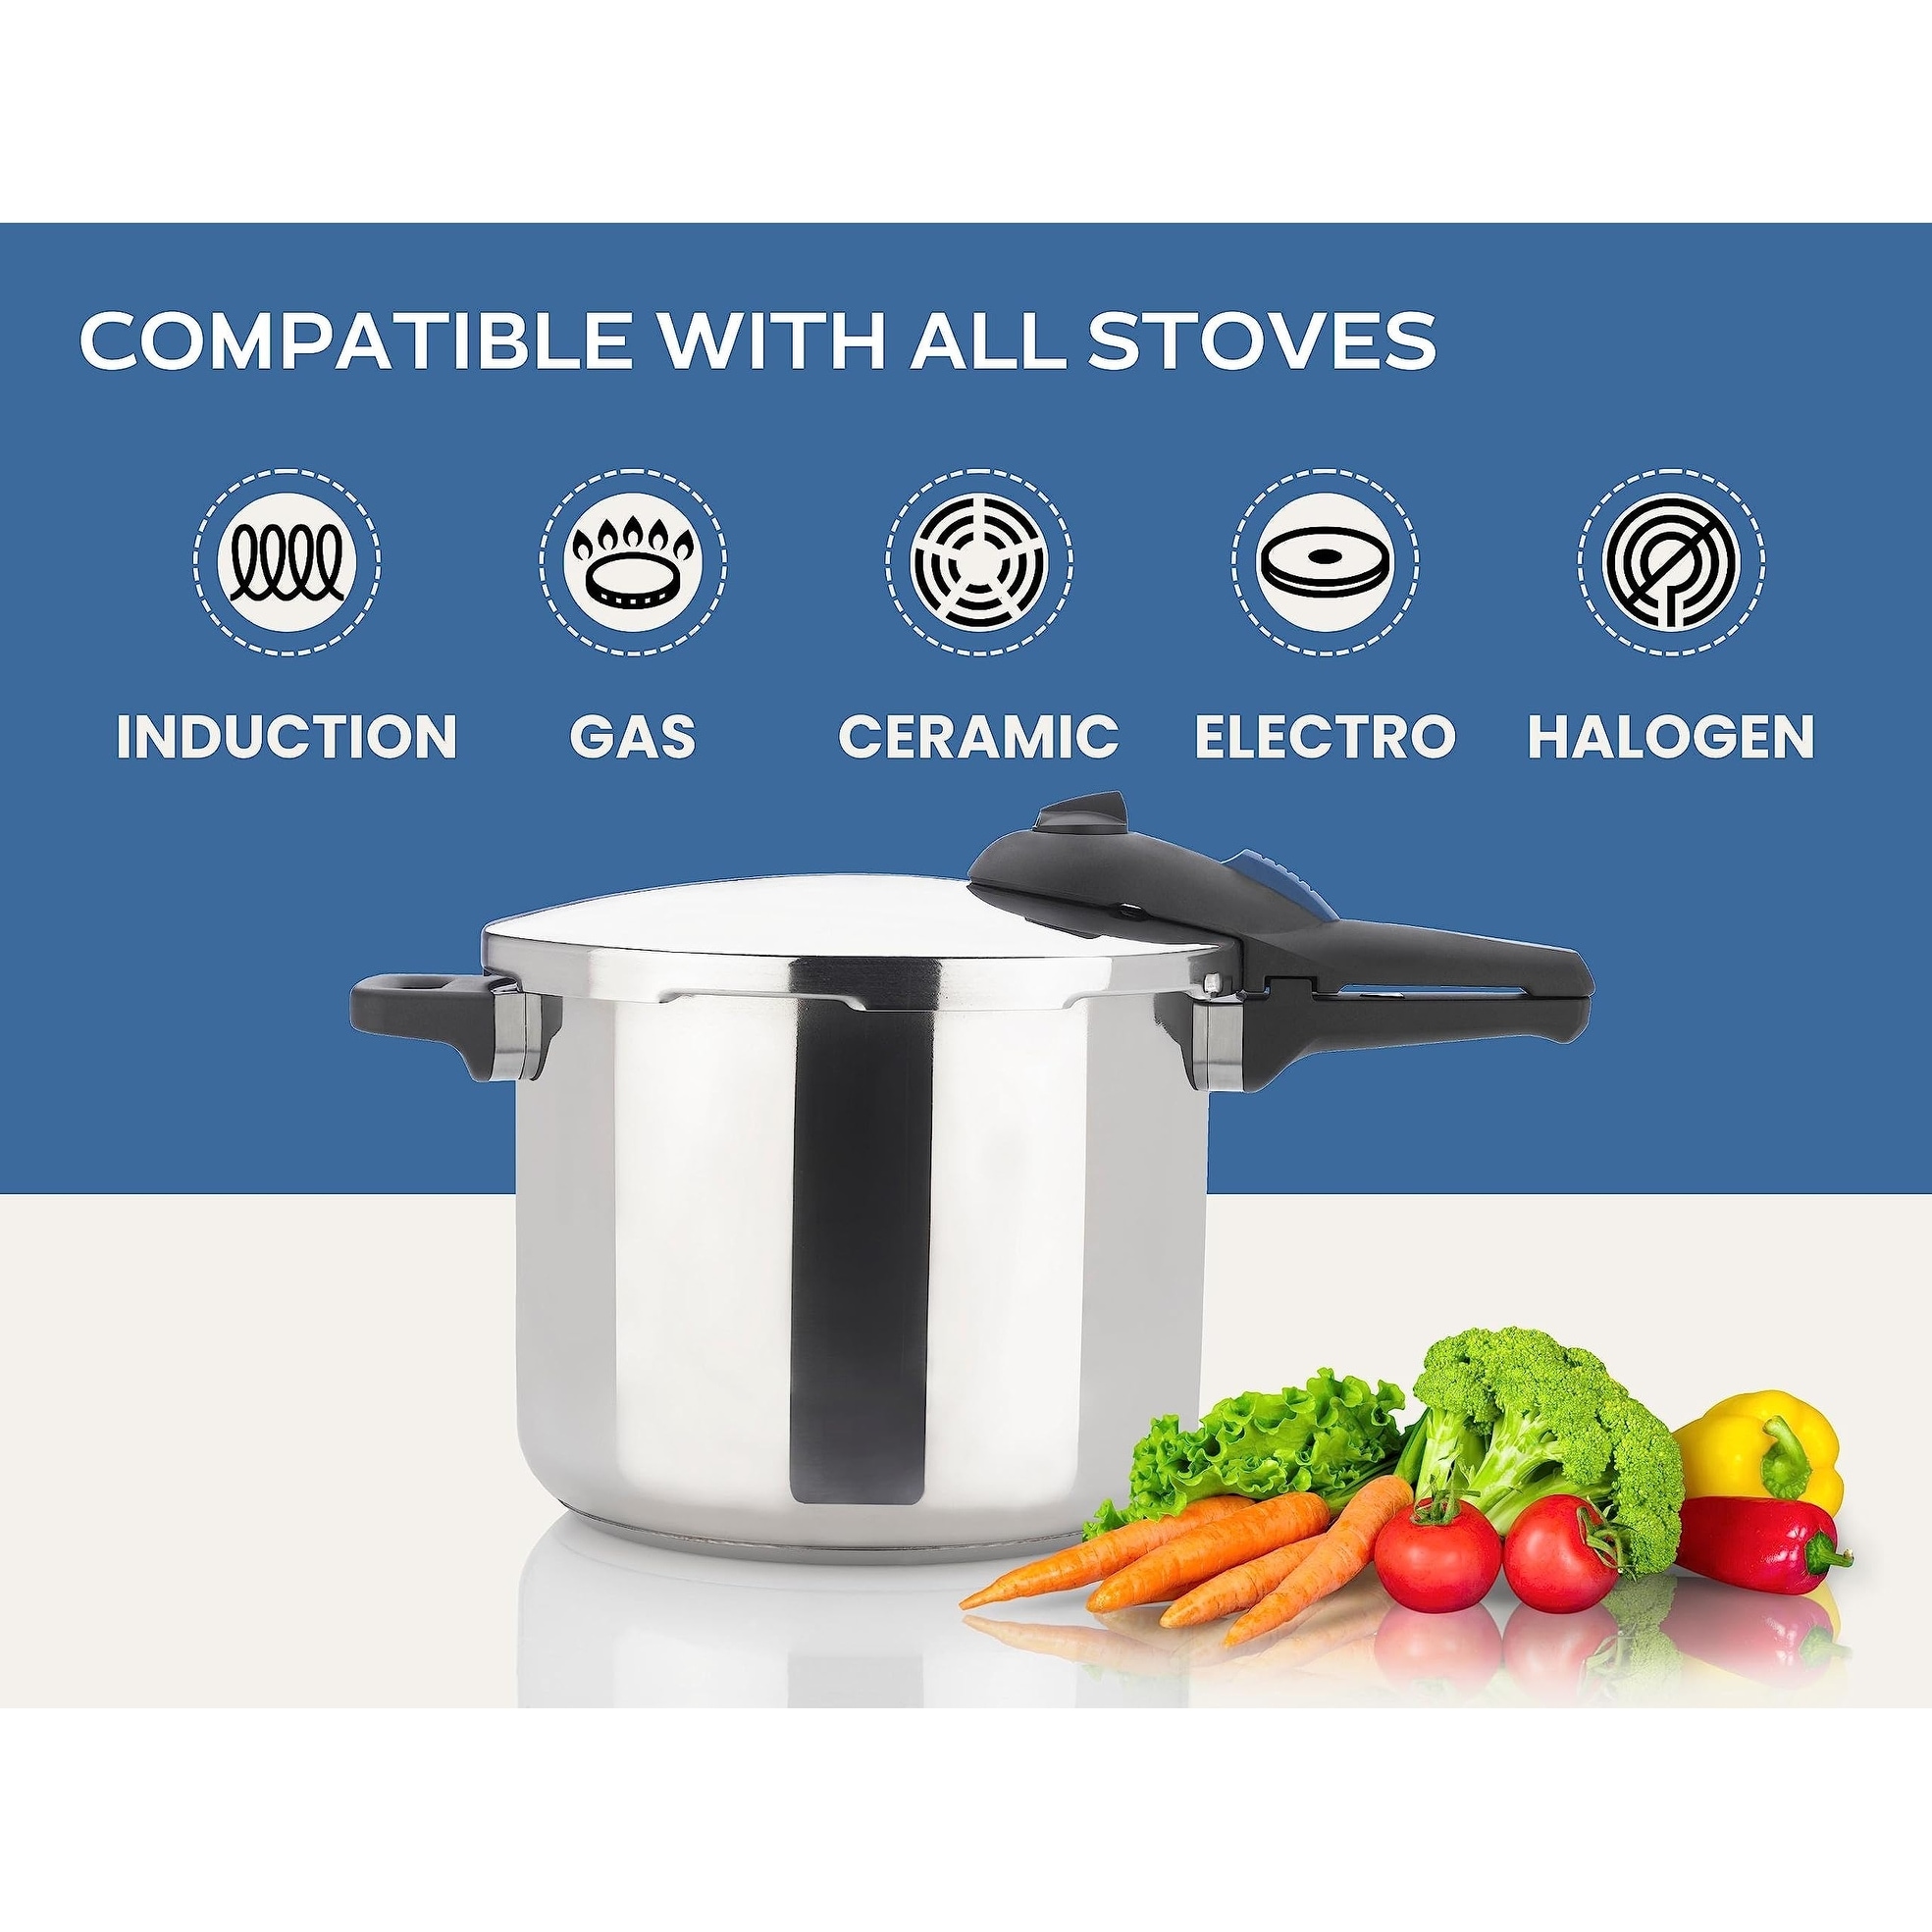 https://ak1.ostkcdn.com/images/products/is/images/direct/69078ce35c49c95aad9aeb59675f4fad976c2dda/10-Quart-Pressure-Cooker-and-Canner%2C-Polished-Stainless-Steel-Rice-Cooker.jpg